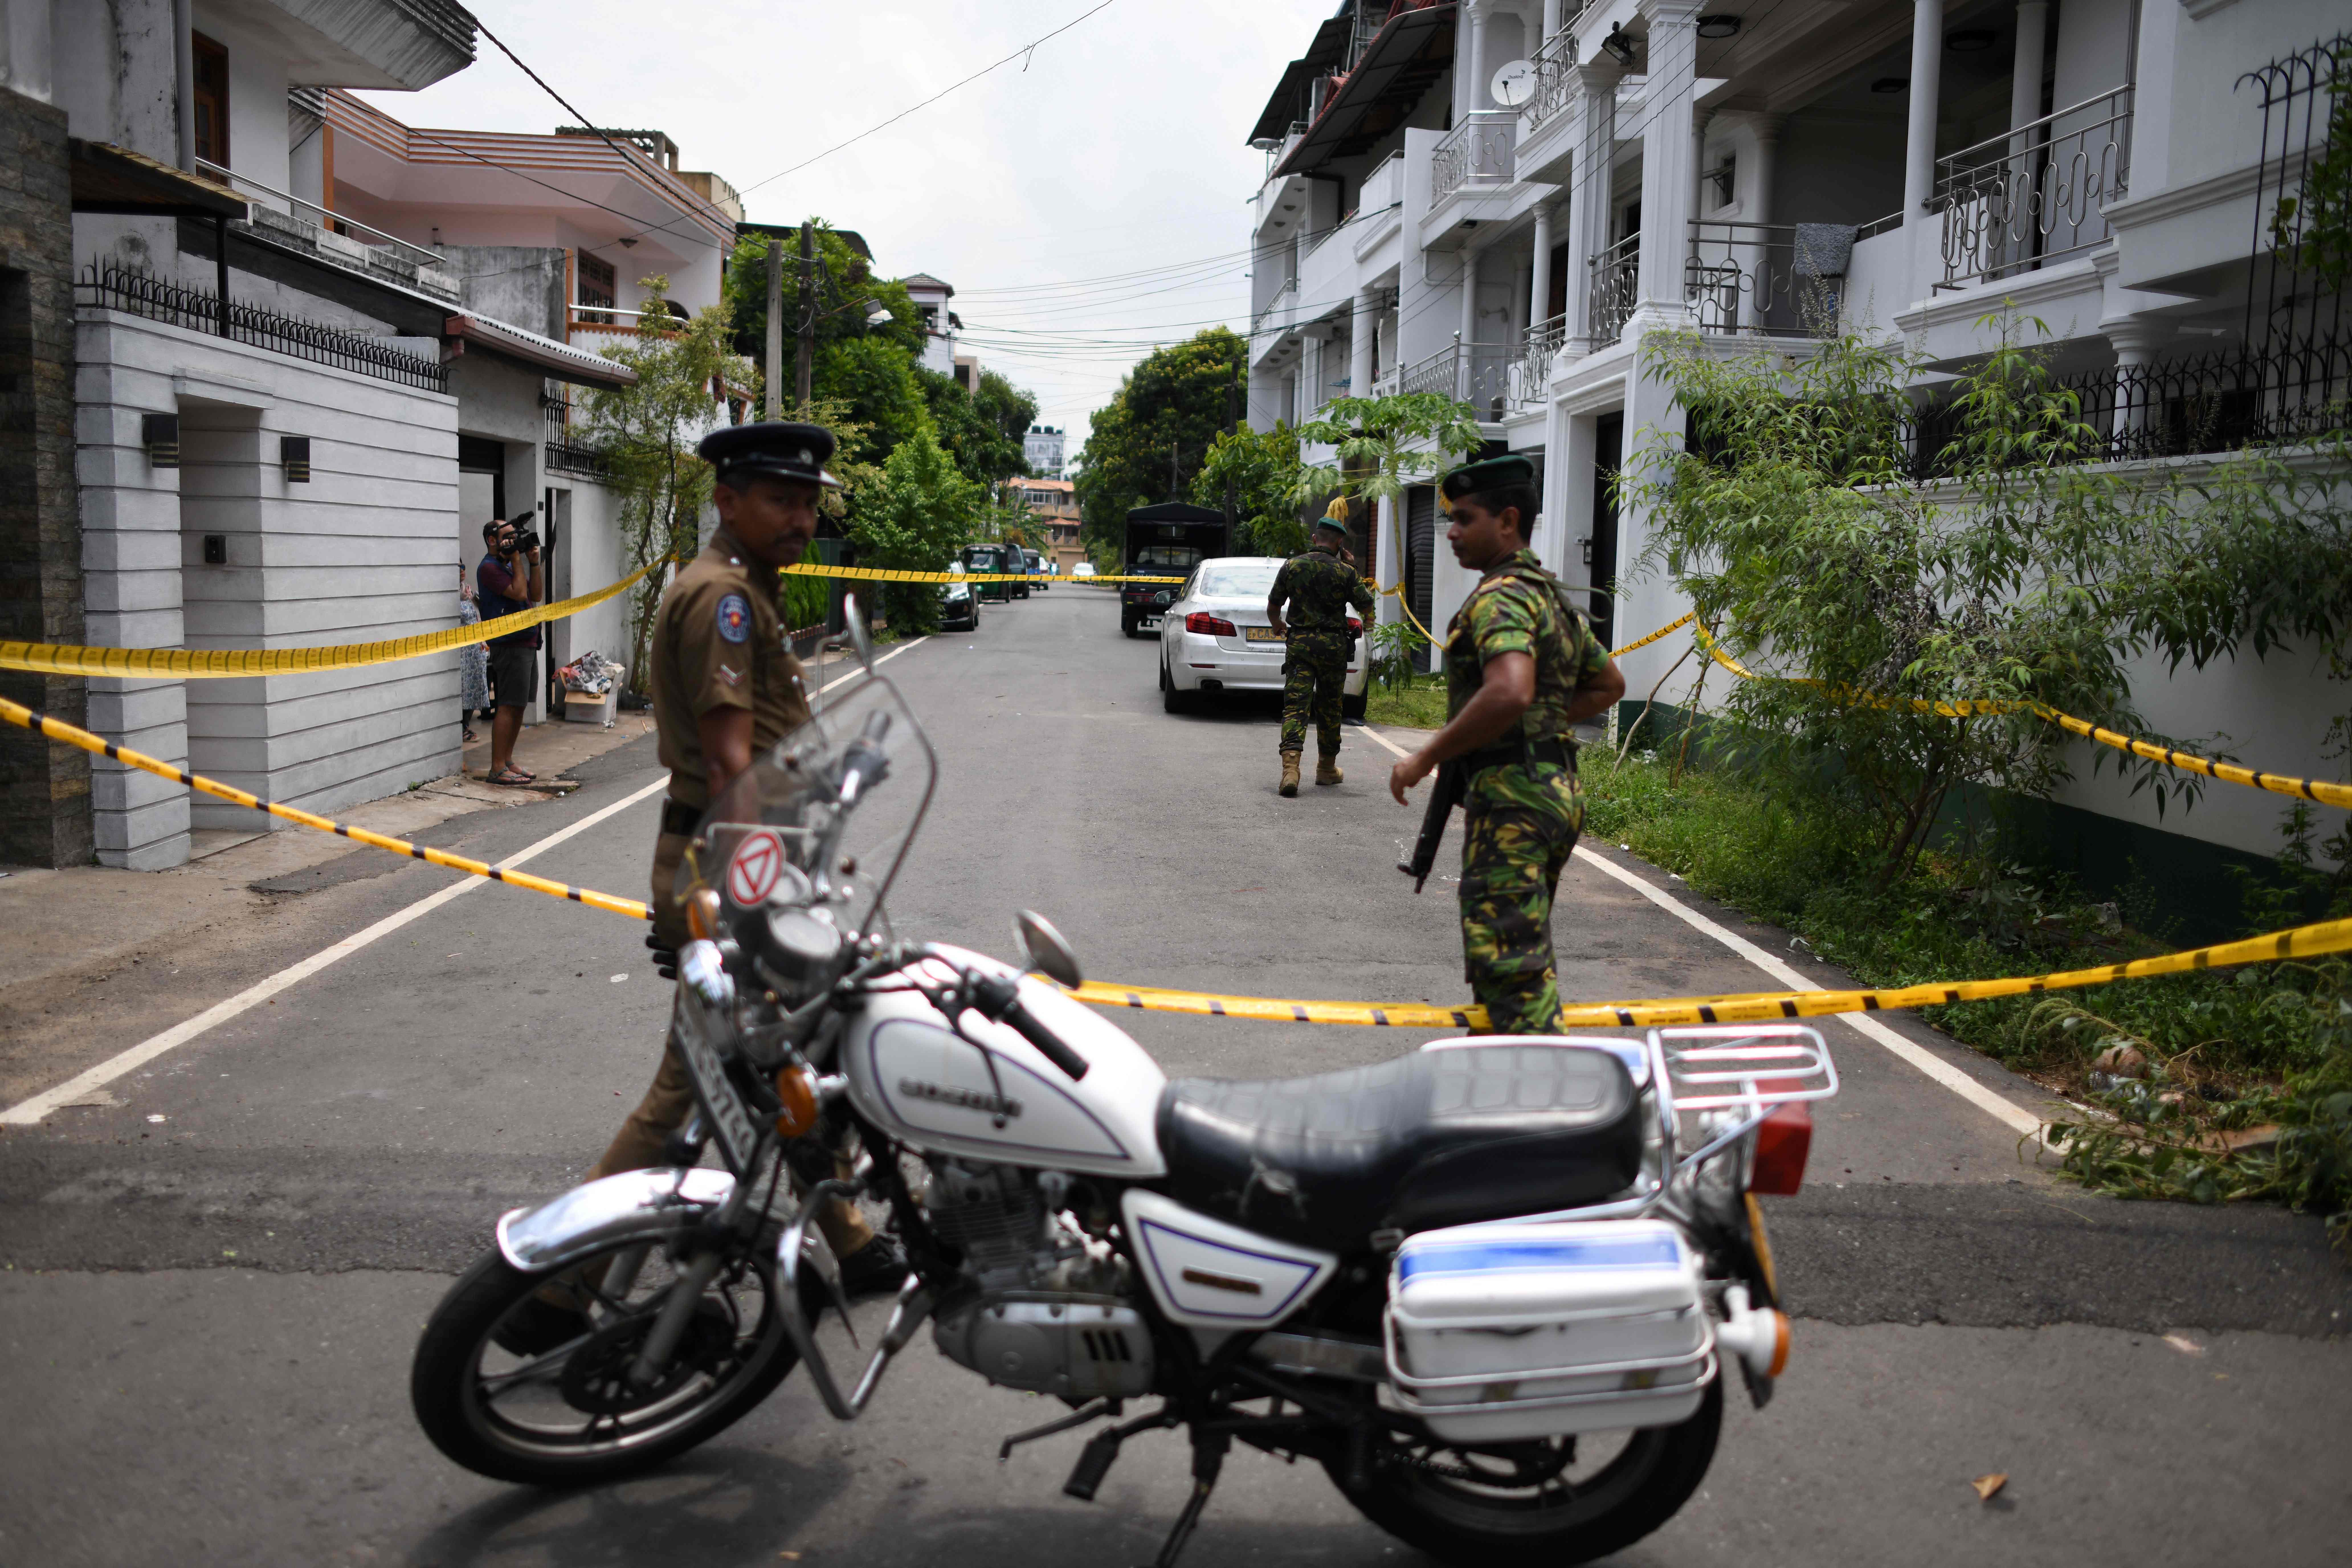 TOPSHOT - In this photo taken on April 23, 2019, Sri Lankan security personnel stand guard around the house of one of the suspected suicide bombers in Colombo. - More than 350 people were killed in the carnage unleashed by the Easter attacks against churches and hotels, which have been claimed by the Islamic State group. The deaths have horrified Sri Lankans and been condemned by Muslim groups, but many in the community have been left feeling vulnerable. (Photo by Mohd RASFAN / AFP) / TO GO WITH SriLanka-unrest-attacks-Muslims,FOCUS by Abhaya SRIVASTAVA